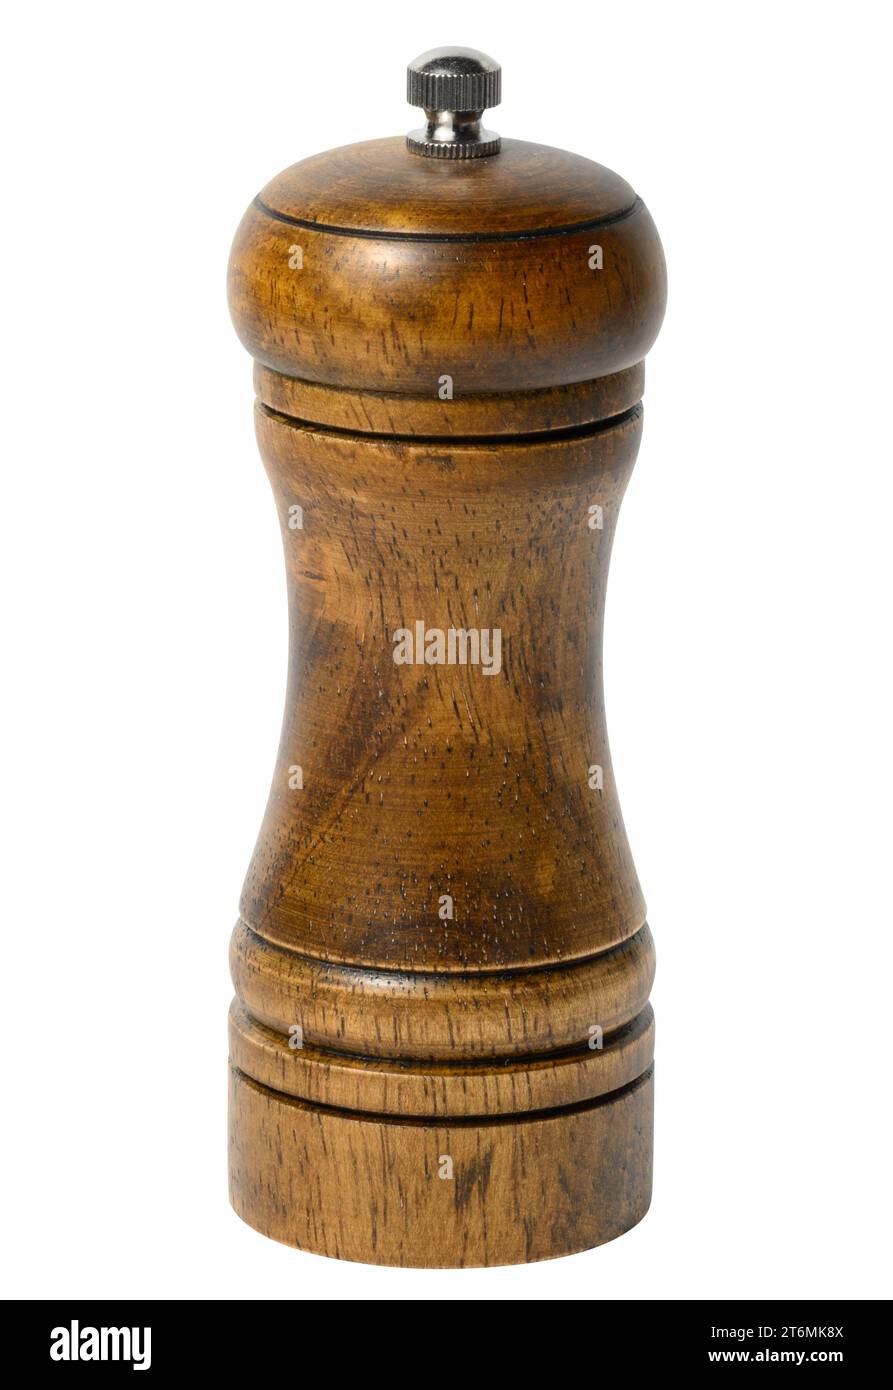 https://c8.alamy.com/comp/2T6MK8X/wooden-pepper-mill-on-a-white-background-made-of-wood-and-has-a-metal-handle-on-top-2T6MK8X.jpg